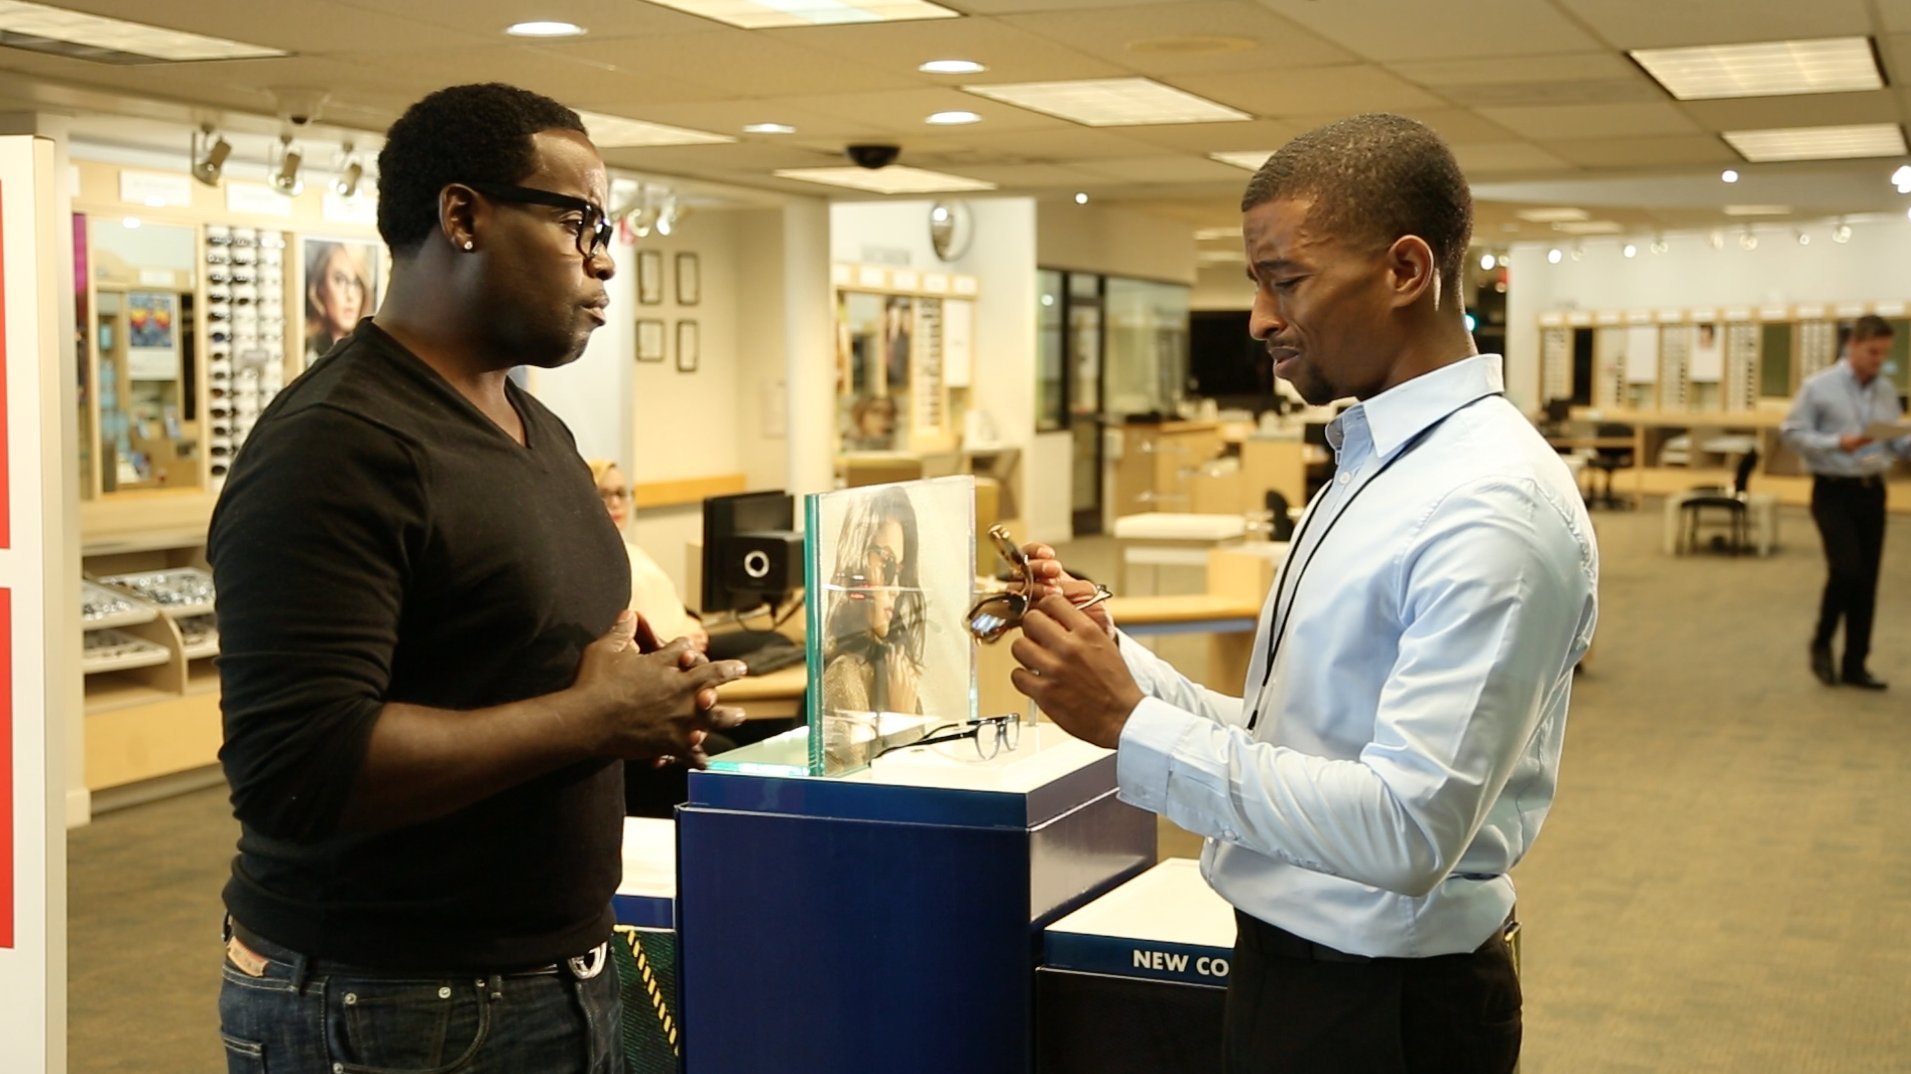 Kevin L. Walker and Gary 'G Thang' Johnson in Retail (2014)